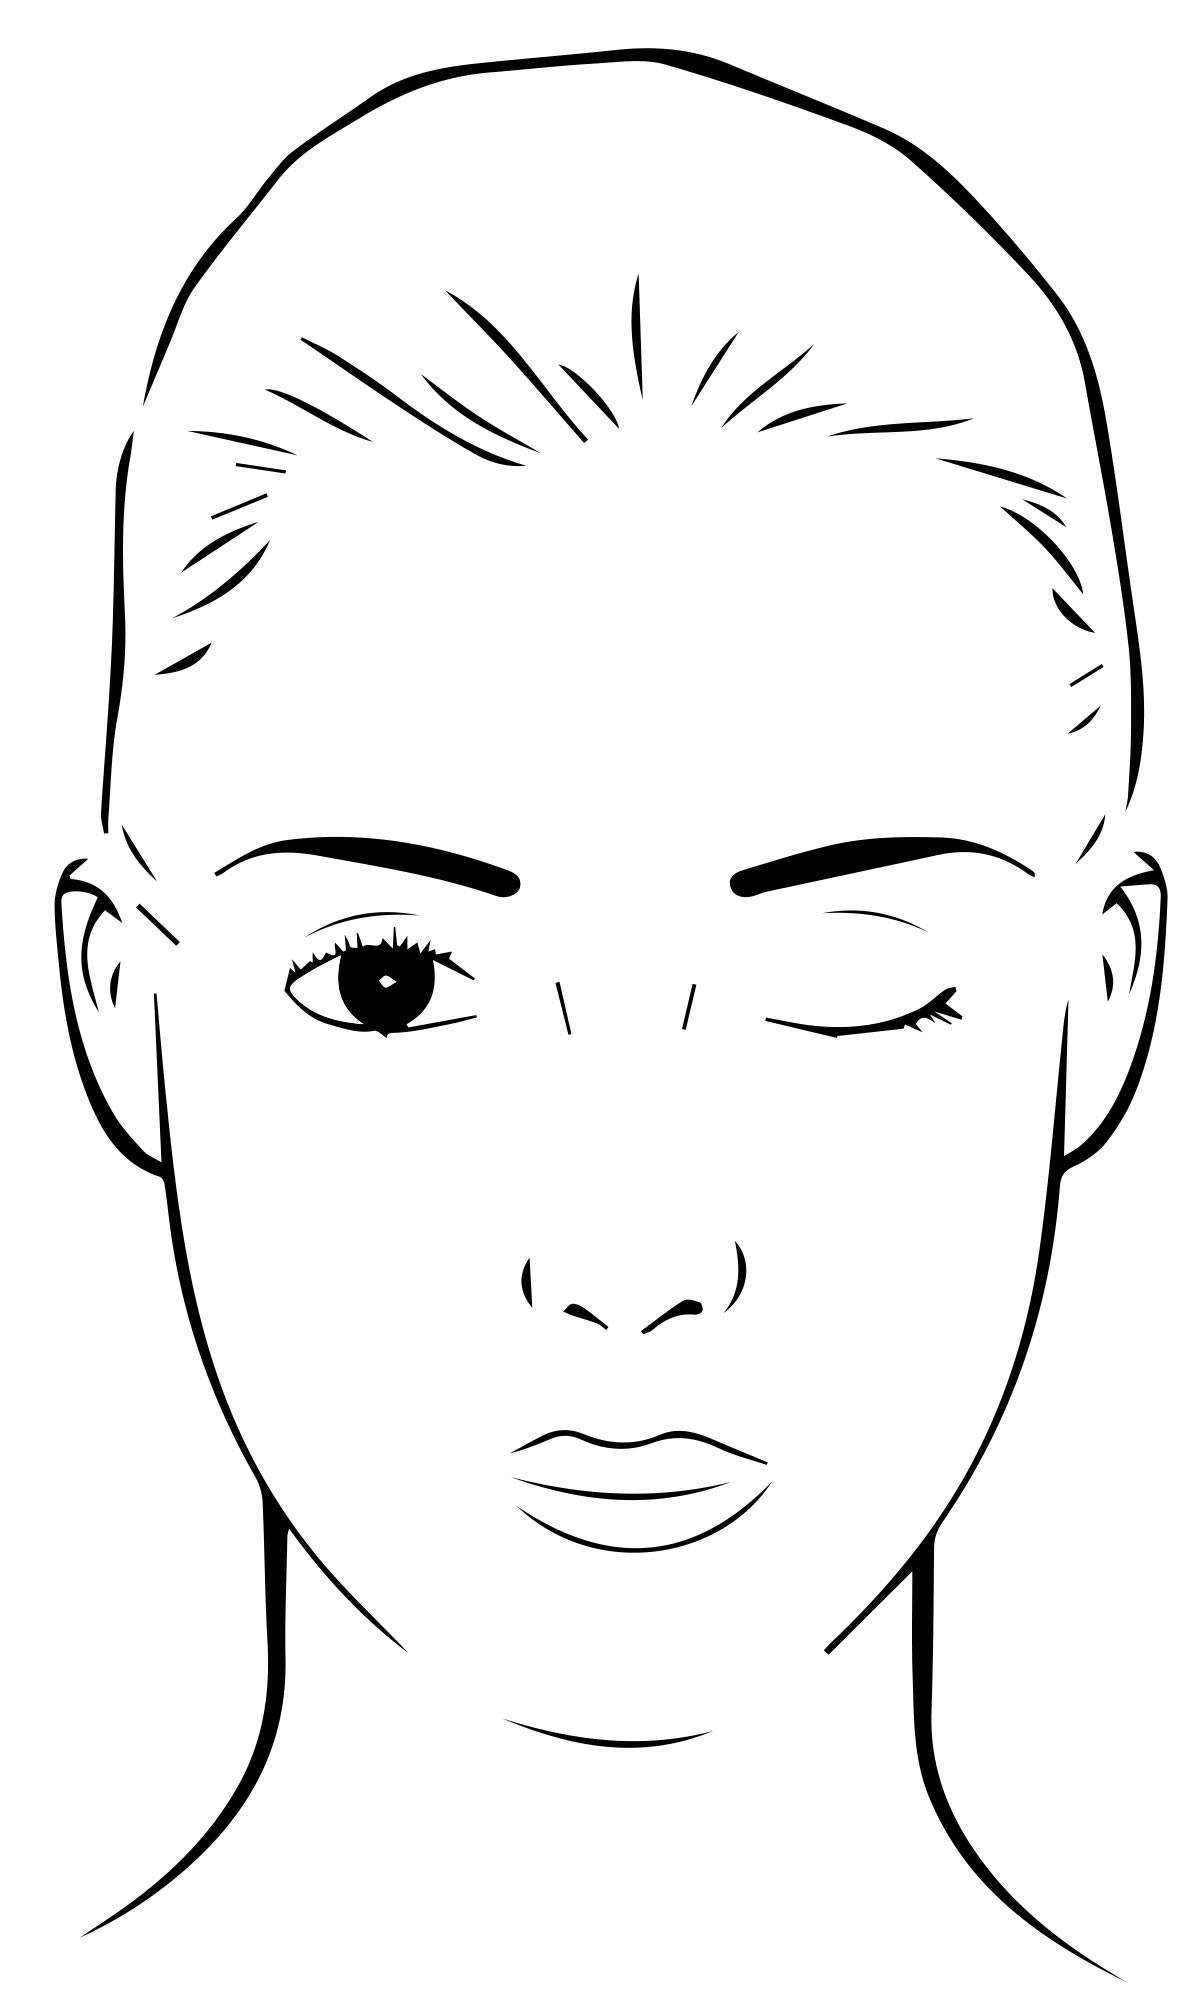 Blossom face coloring page